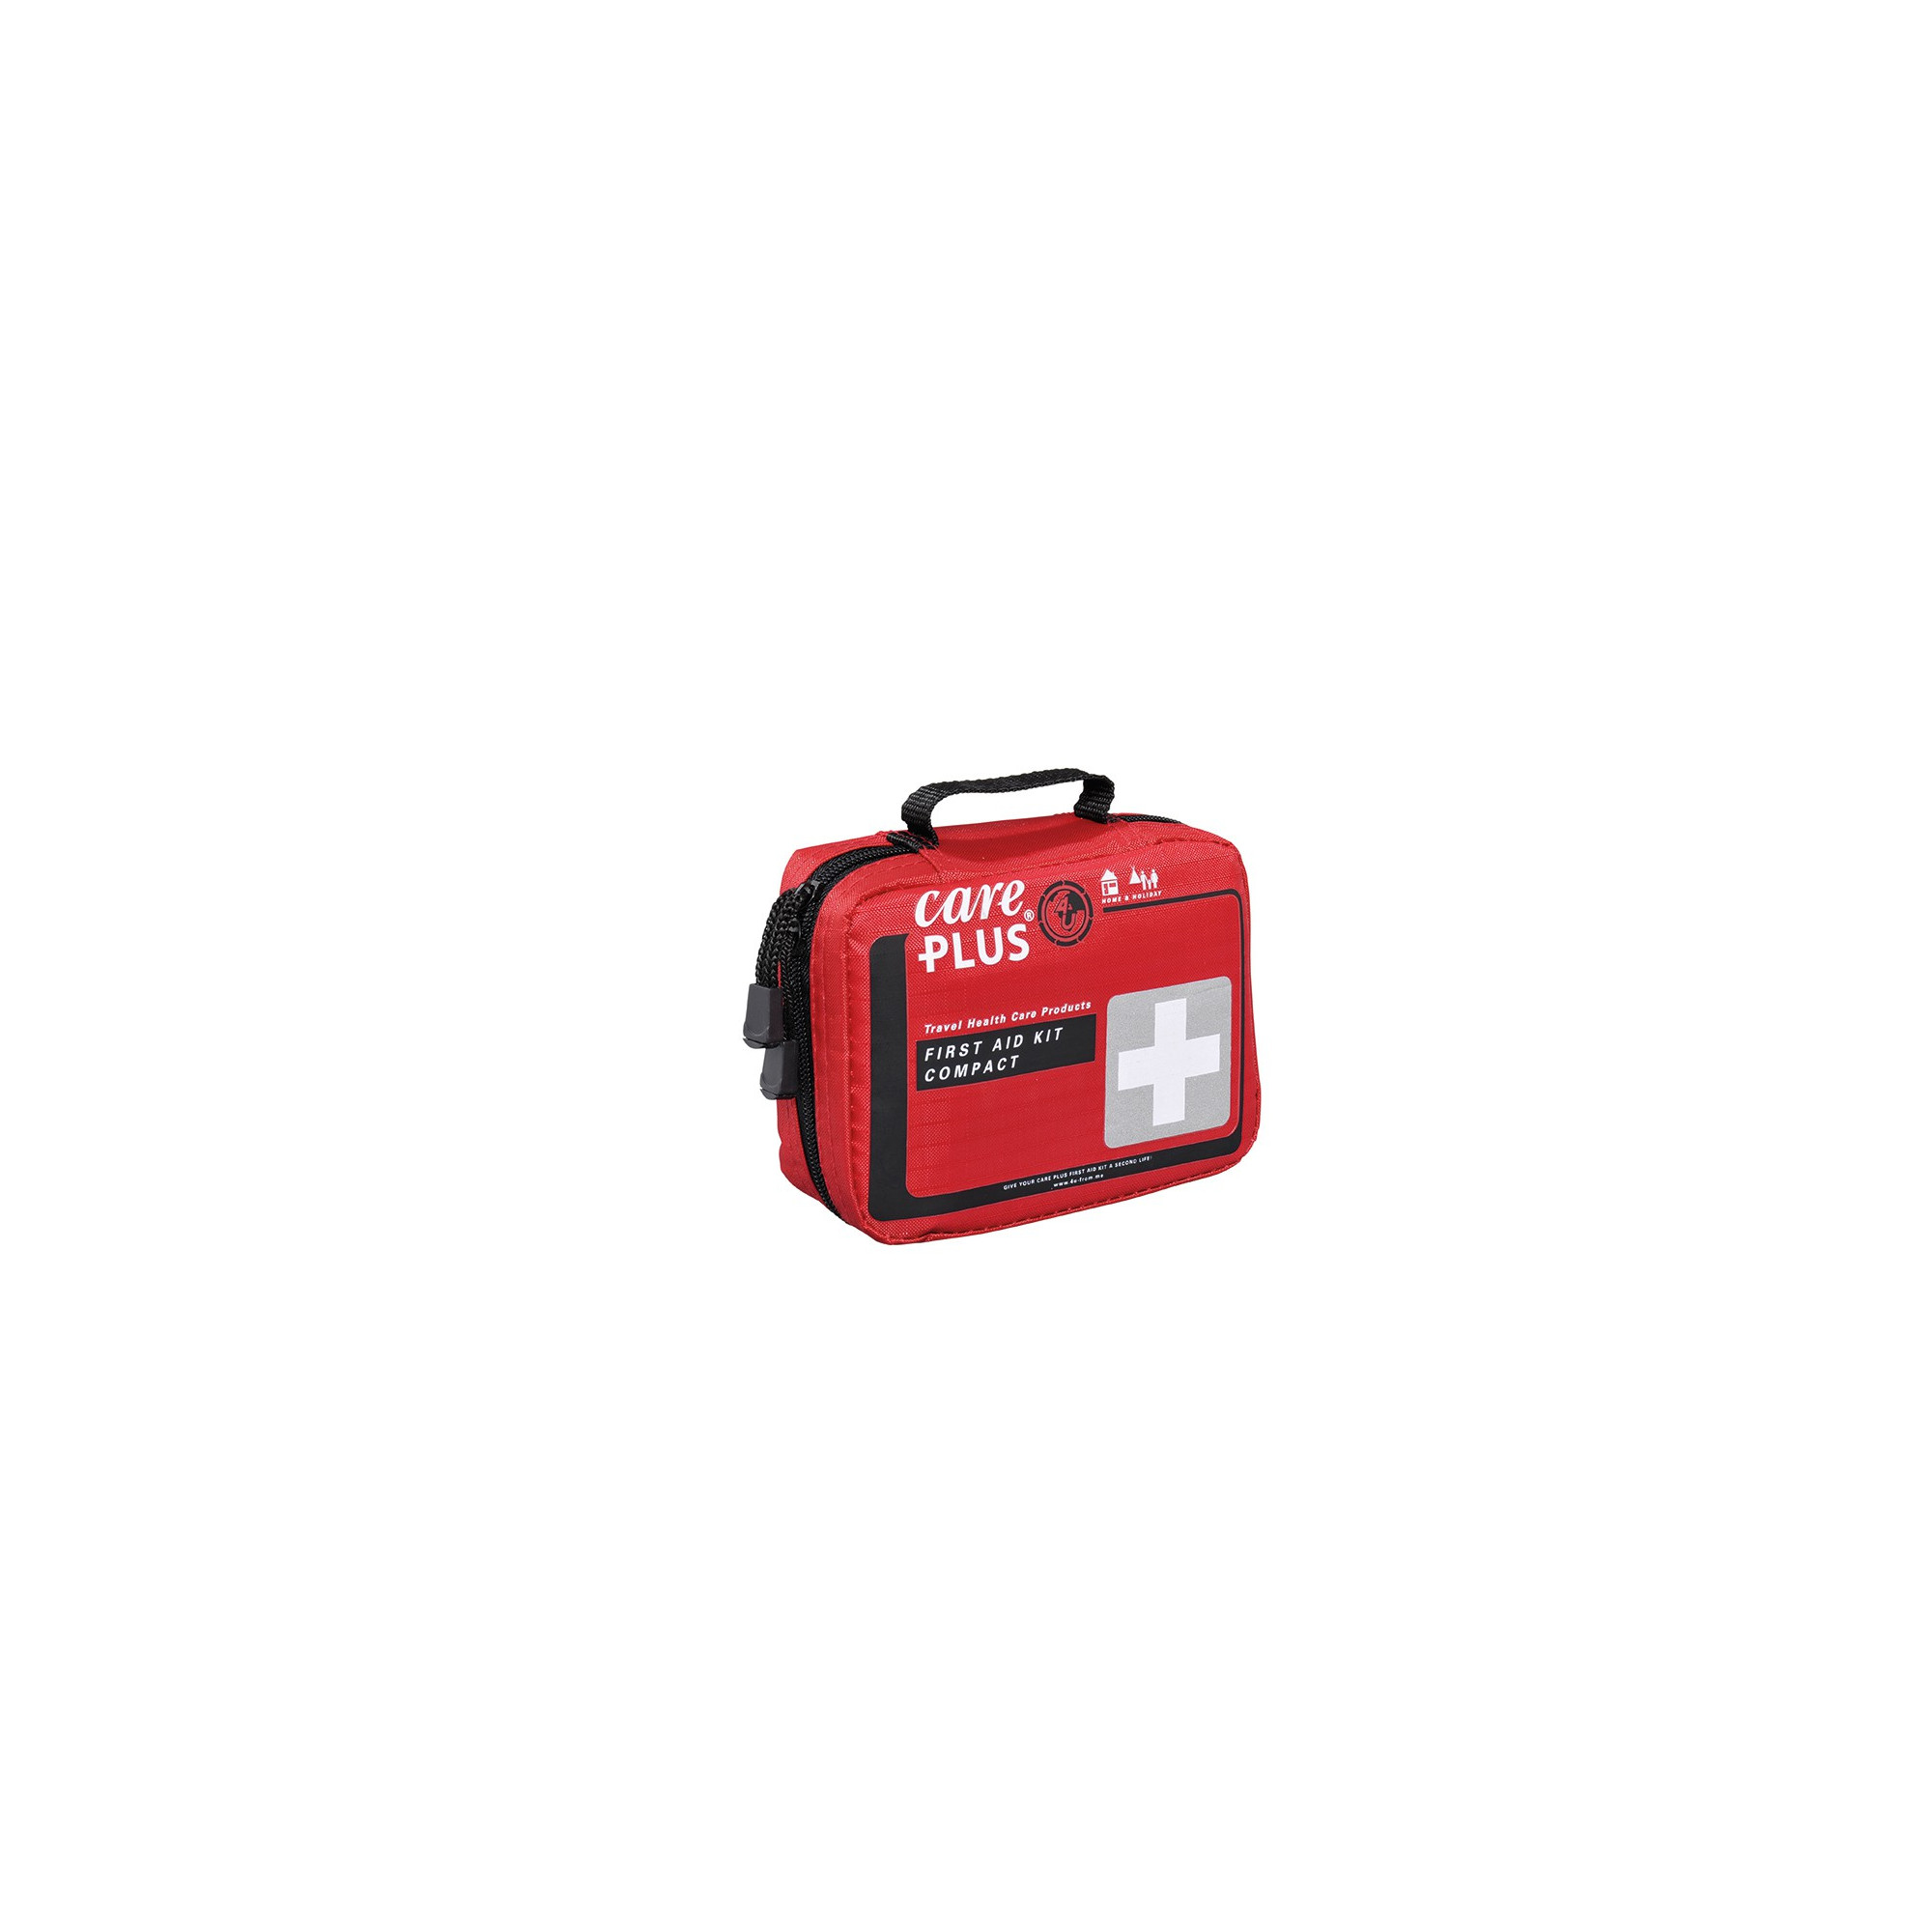 Compact CARE PLUS first aid kit